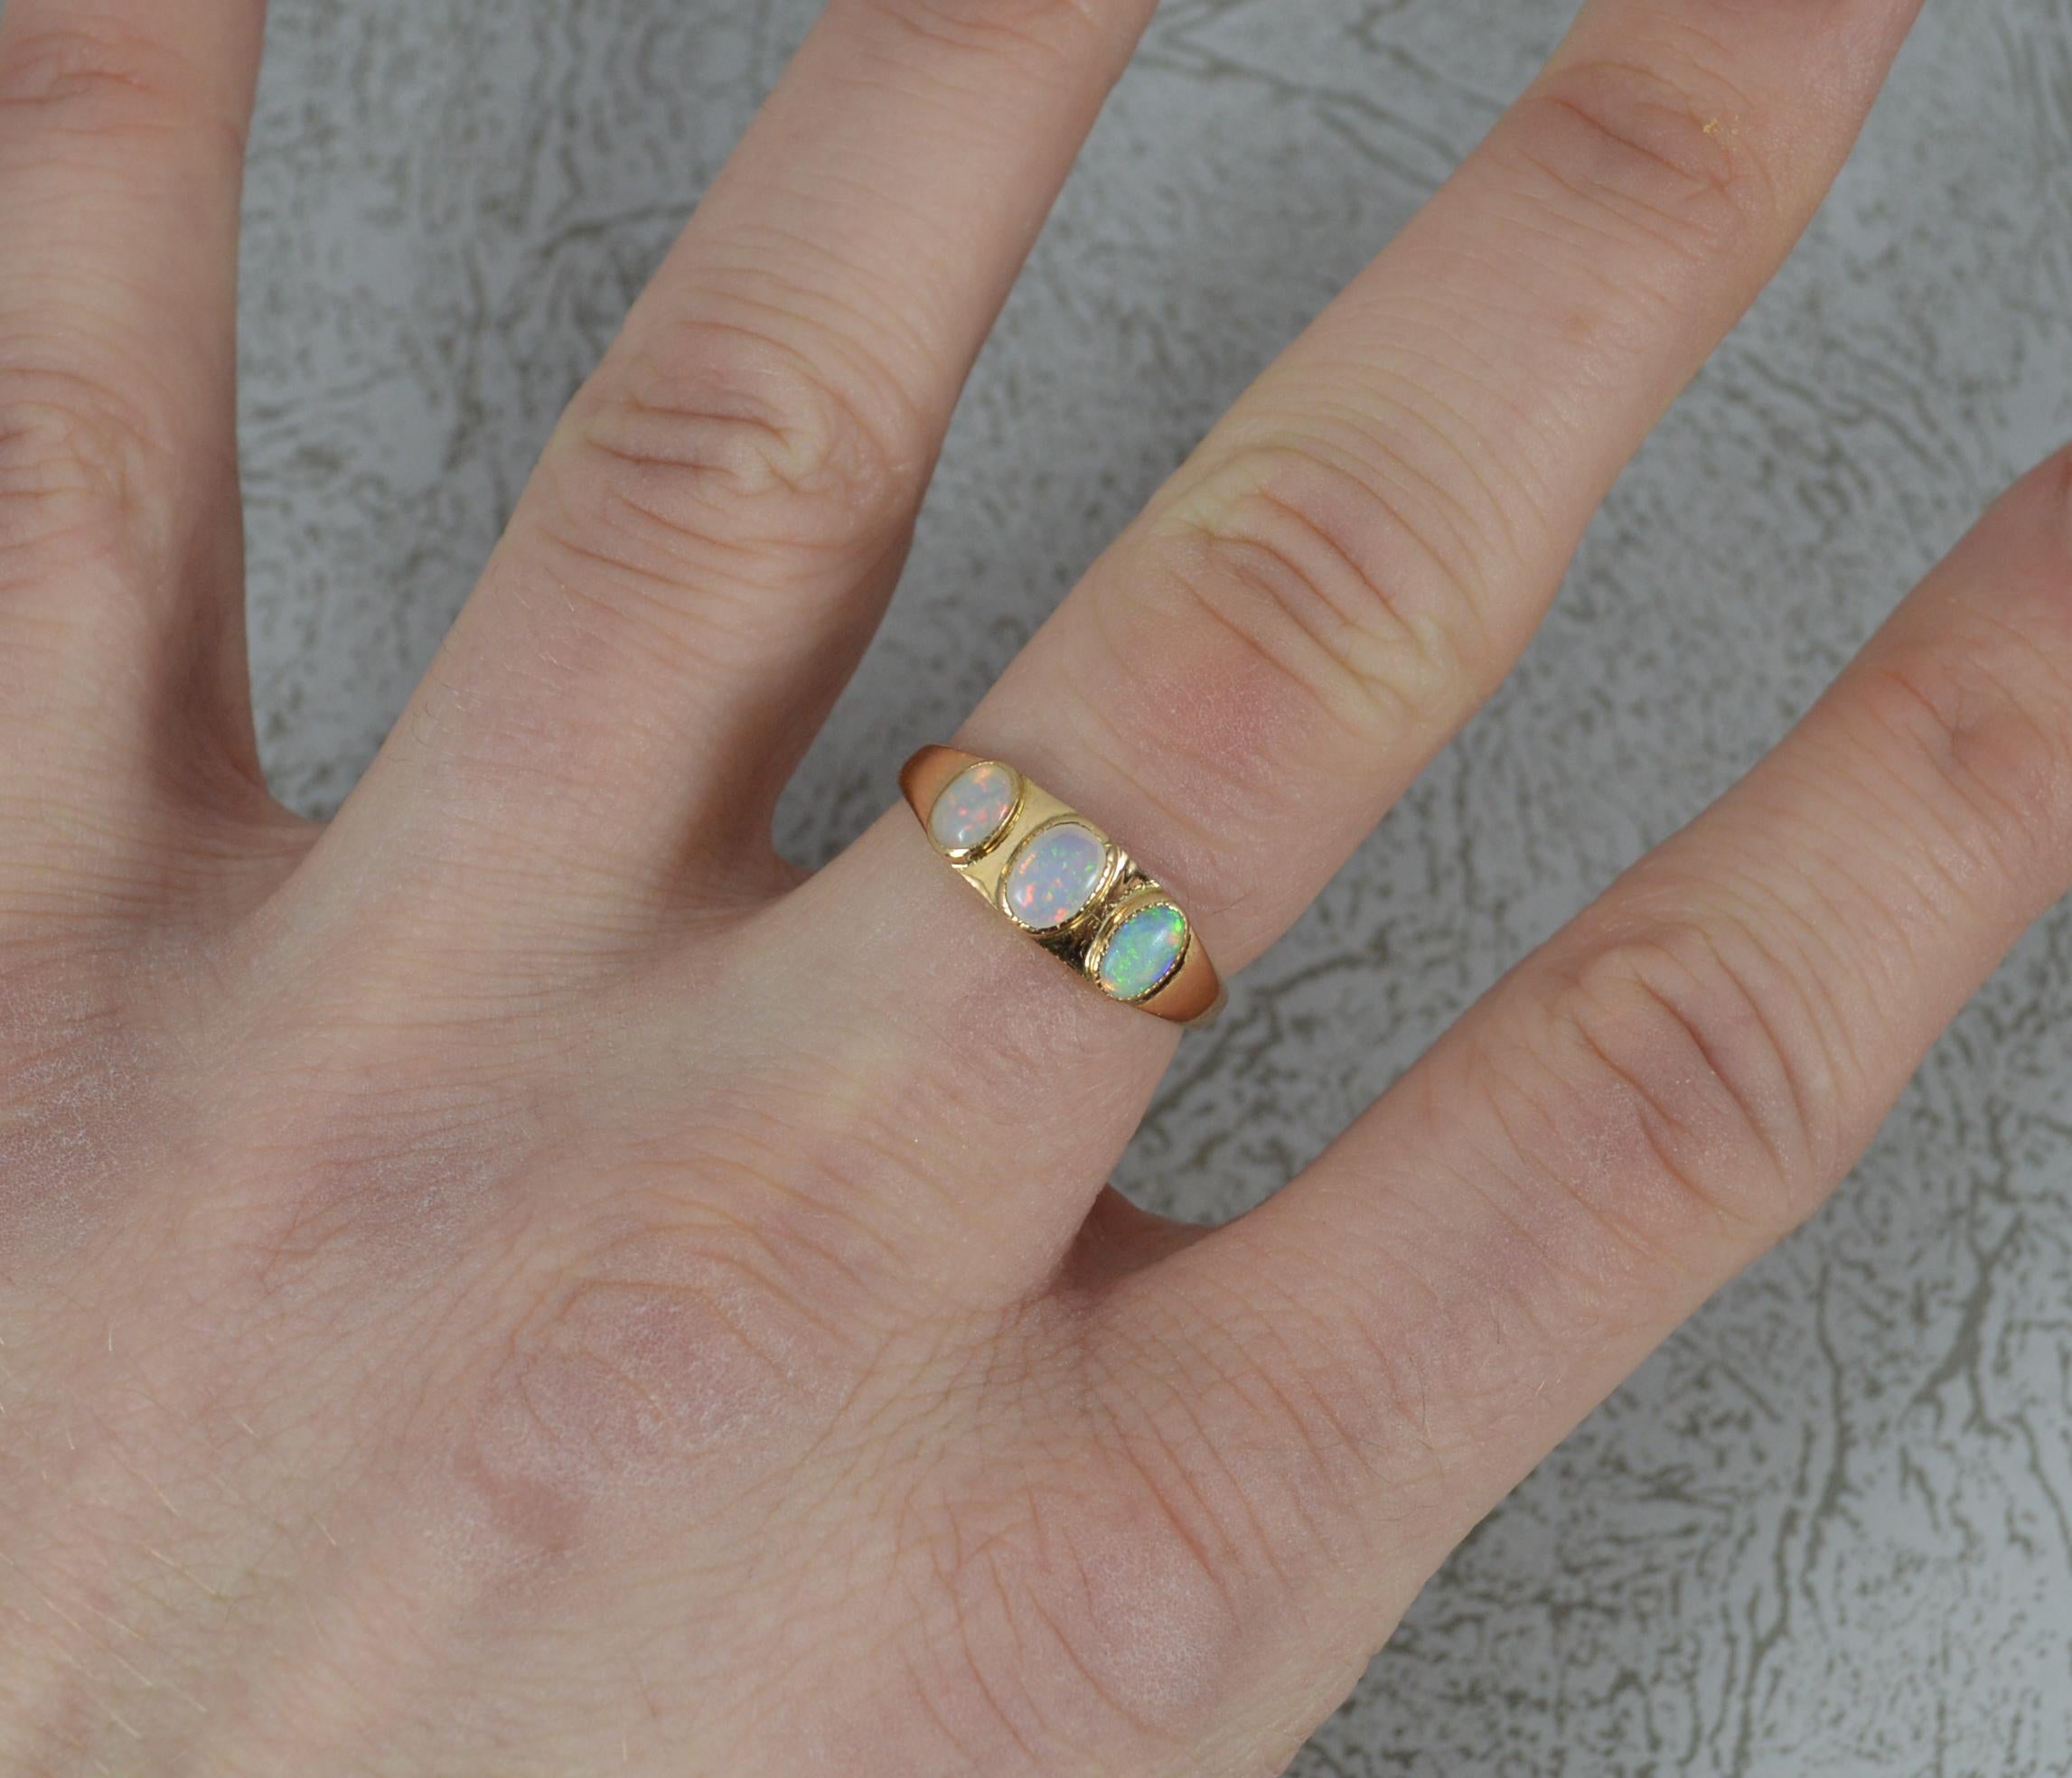 A late Victorian period three opal ring.
Solid 15 carat yellow gold example.
Designed with three natural oval shaped opals in fine bezel settings.
3.8mm x 5.4mm central opal.
13.5mm spread of stones. 5.9mm wide band to front.

CONDITION ; Excellent.